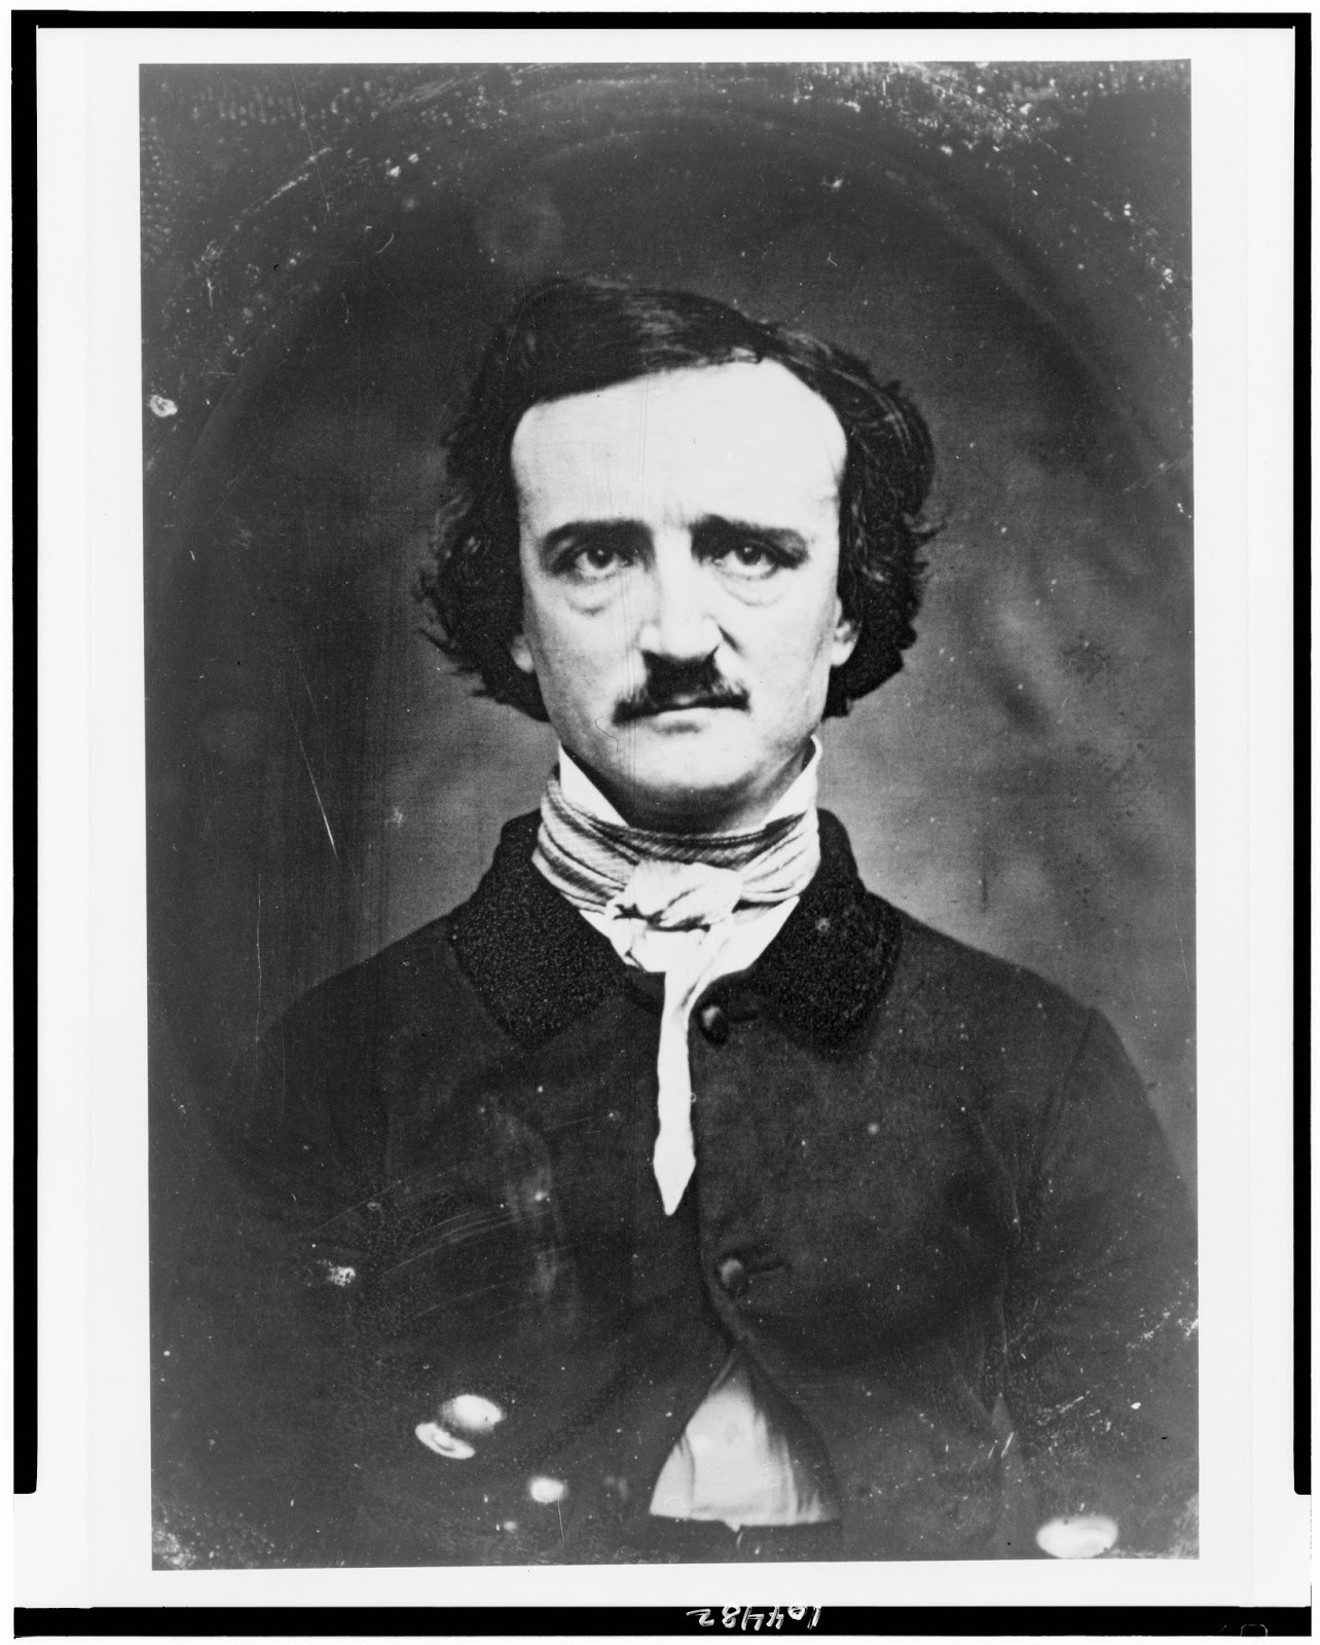 Not a bad photo considering the subject had just overdosed on laudanum and was a year away from death. 168 years later, he appears in Poe-ssessed!.